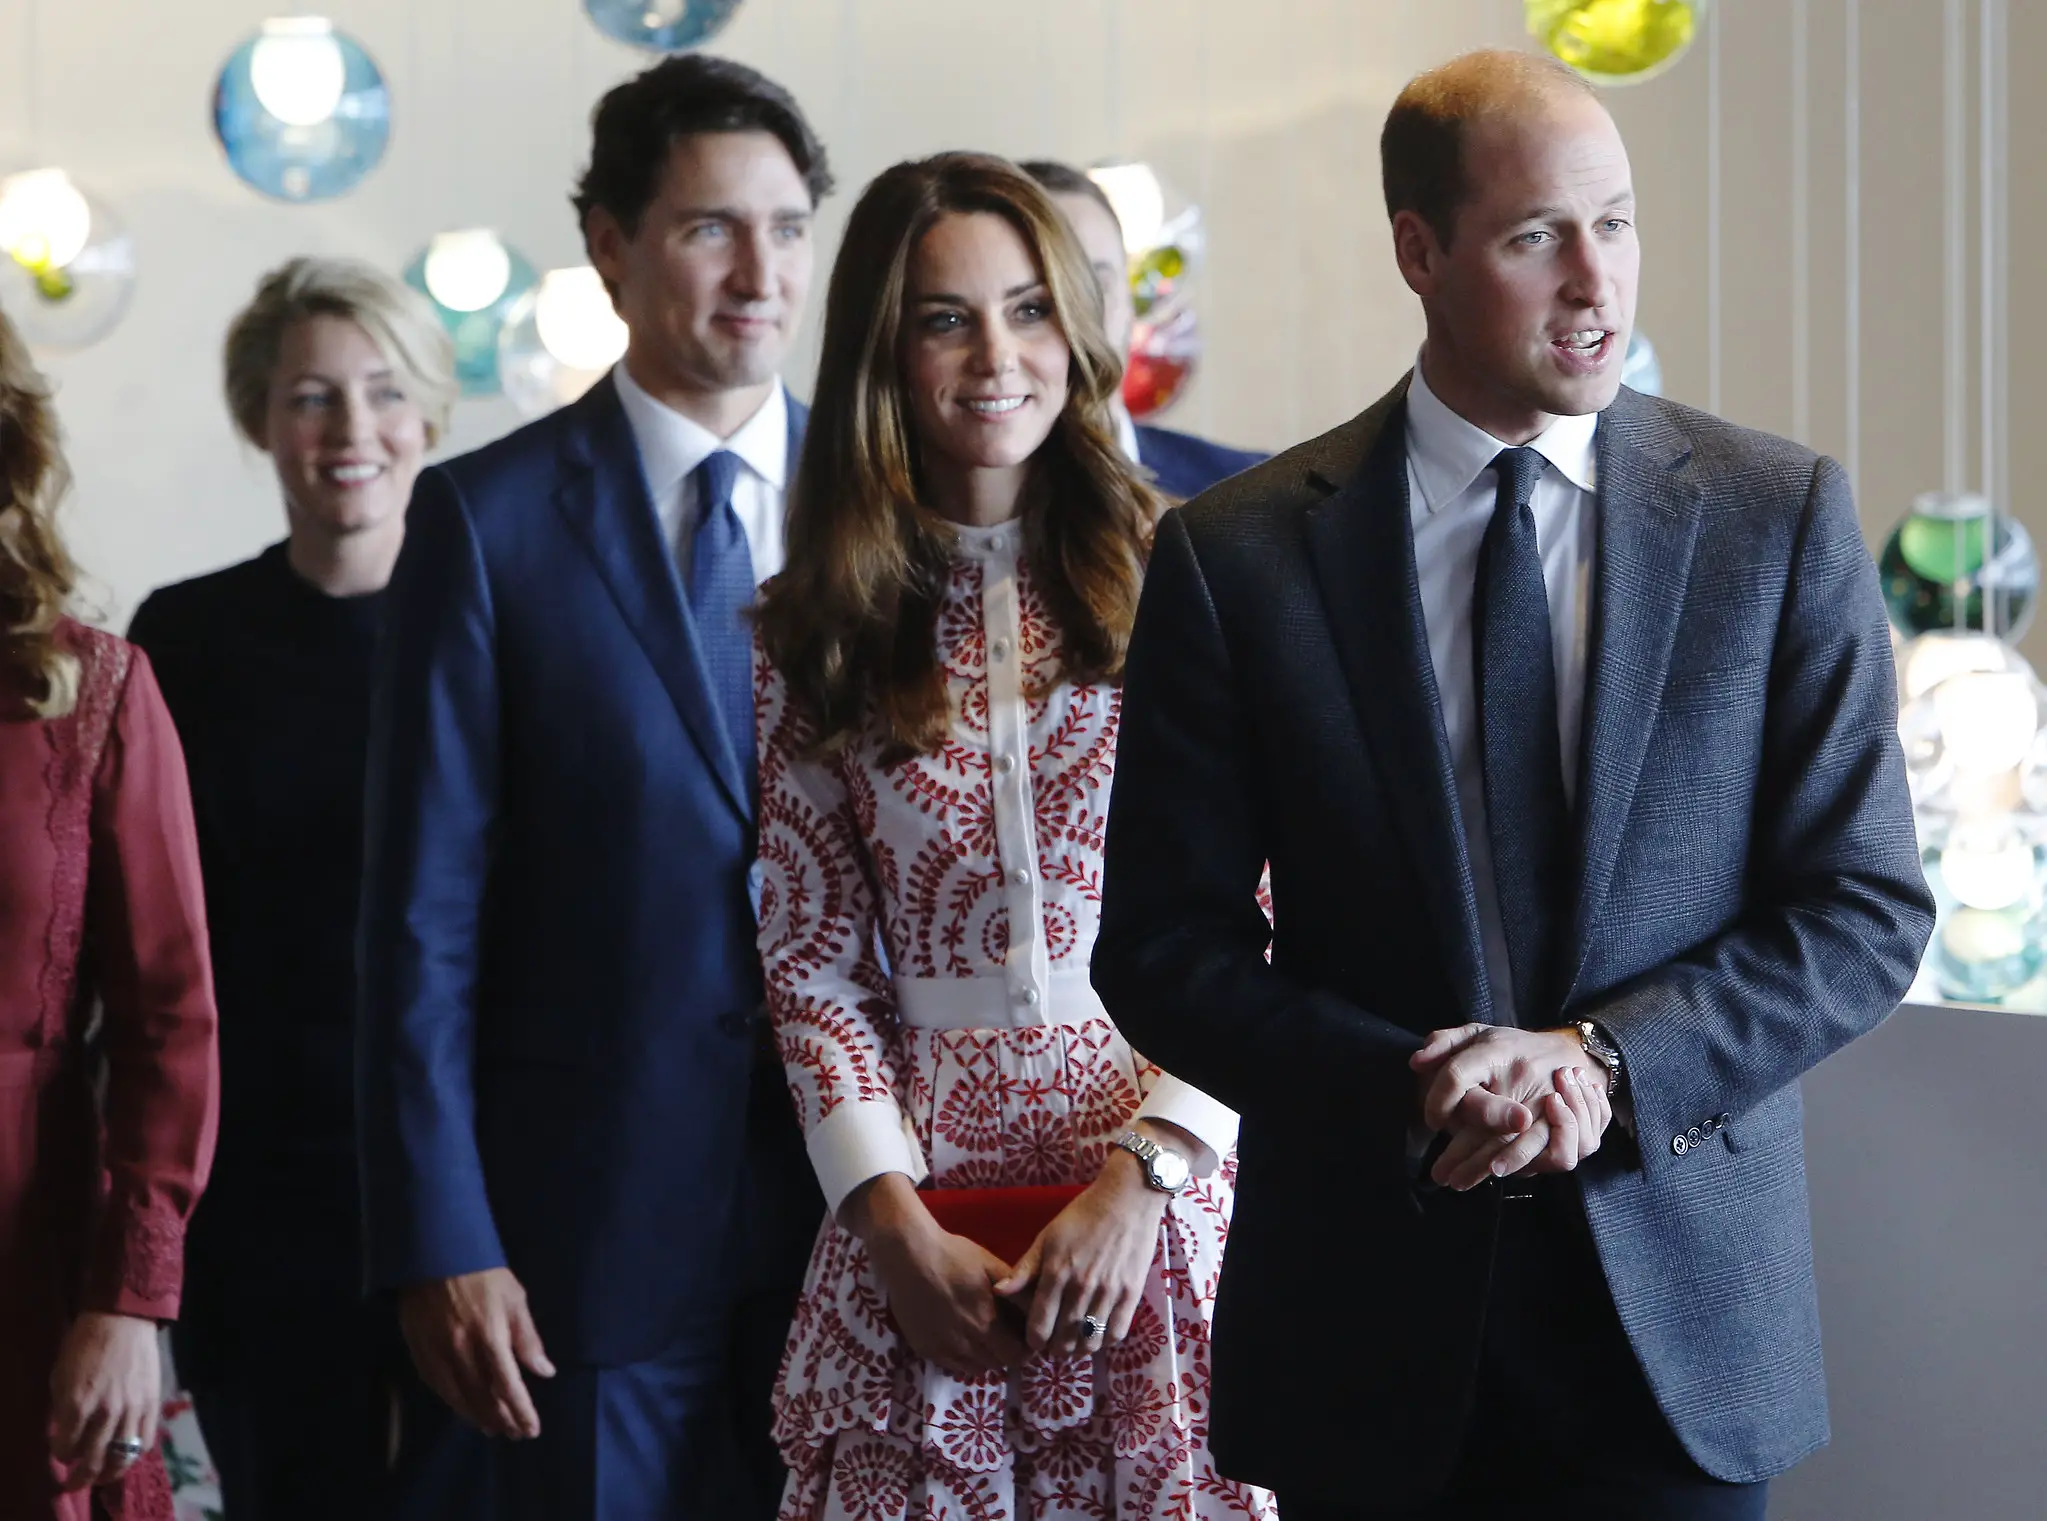 The Duke and Duchess of cambridge met with the first responders in Vancouver